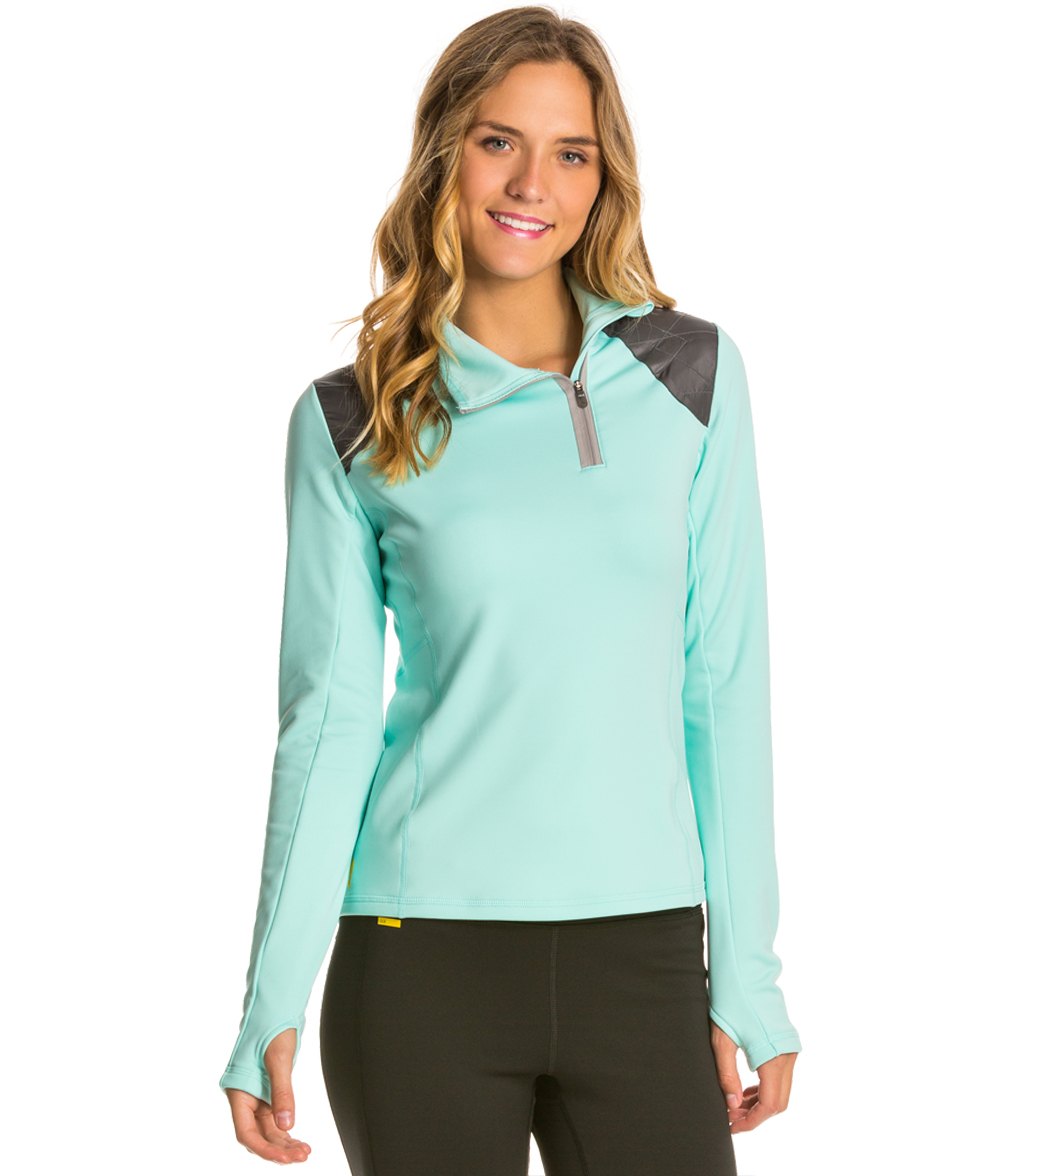 Lole Women's Performance Top - Clearly Aqua Small Size Small - Swimoutlet.com